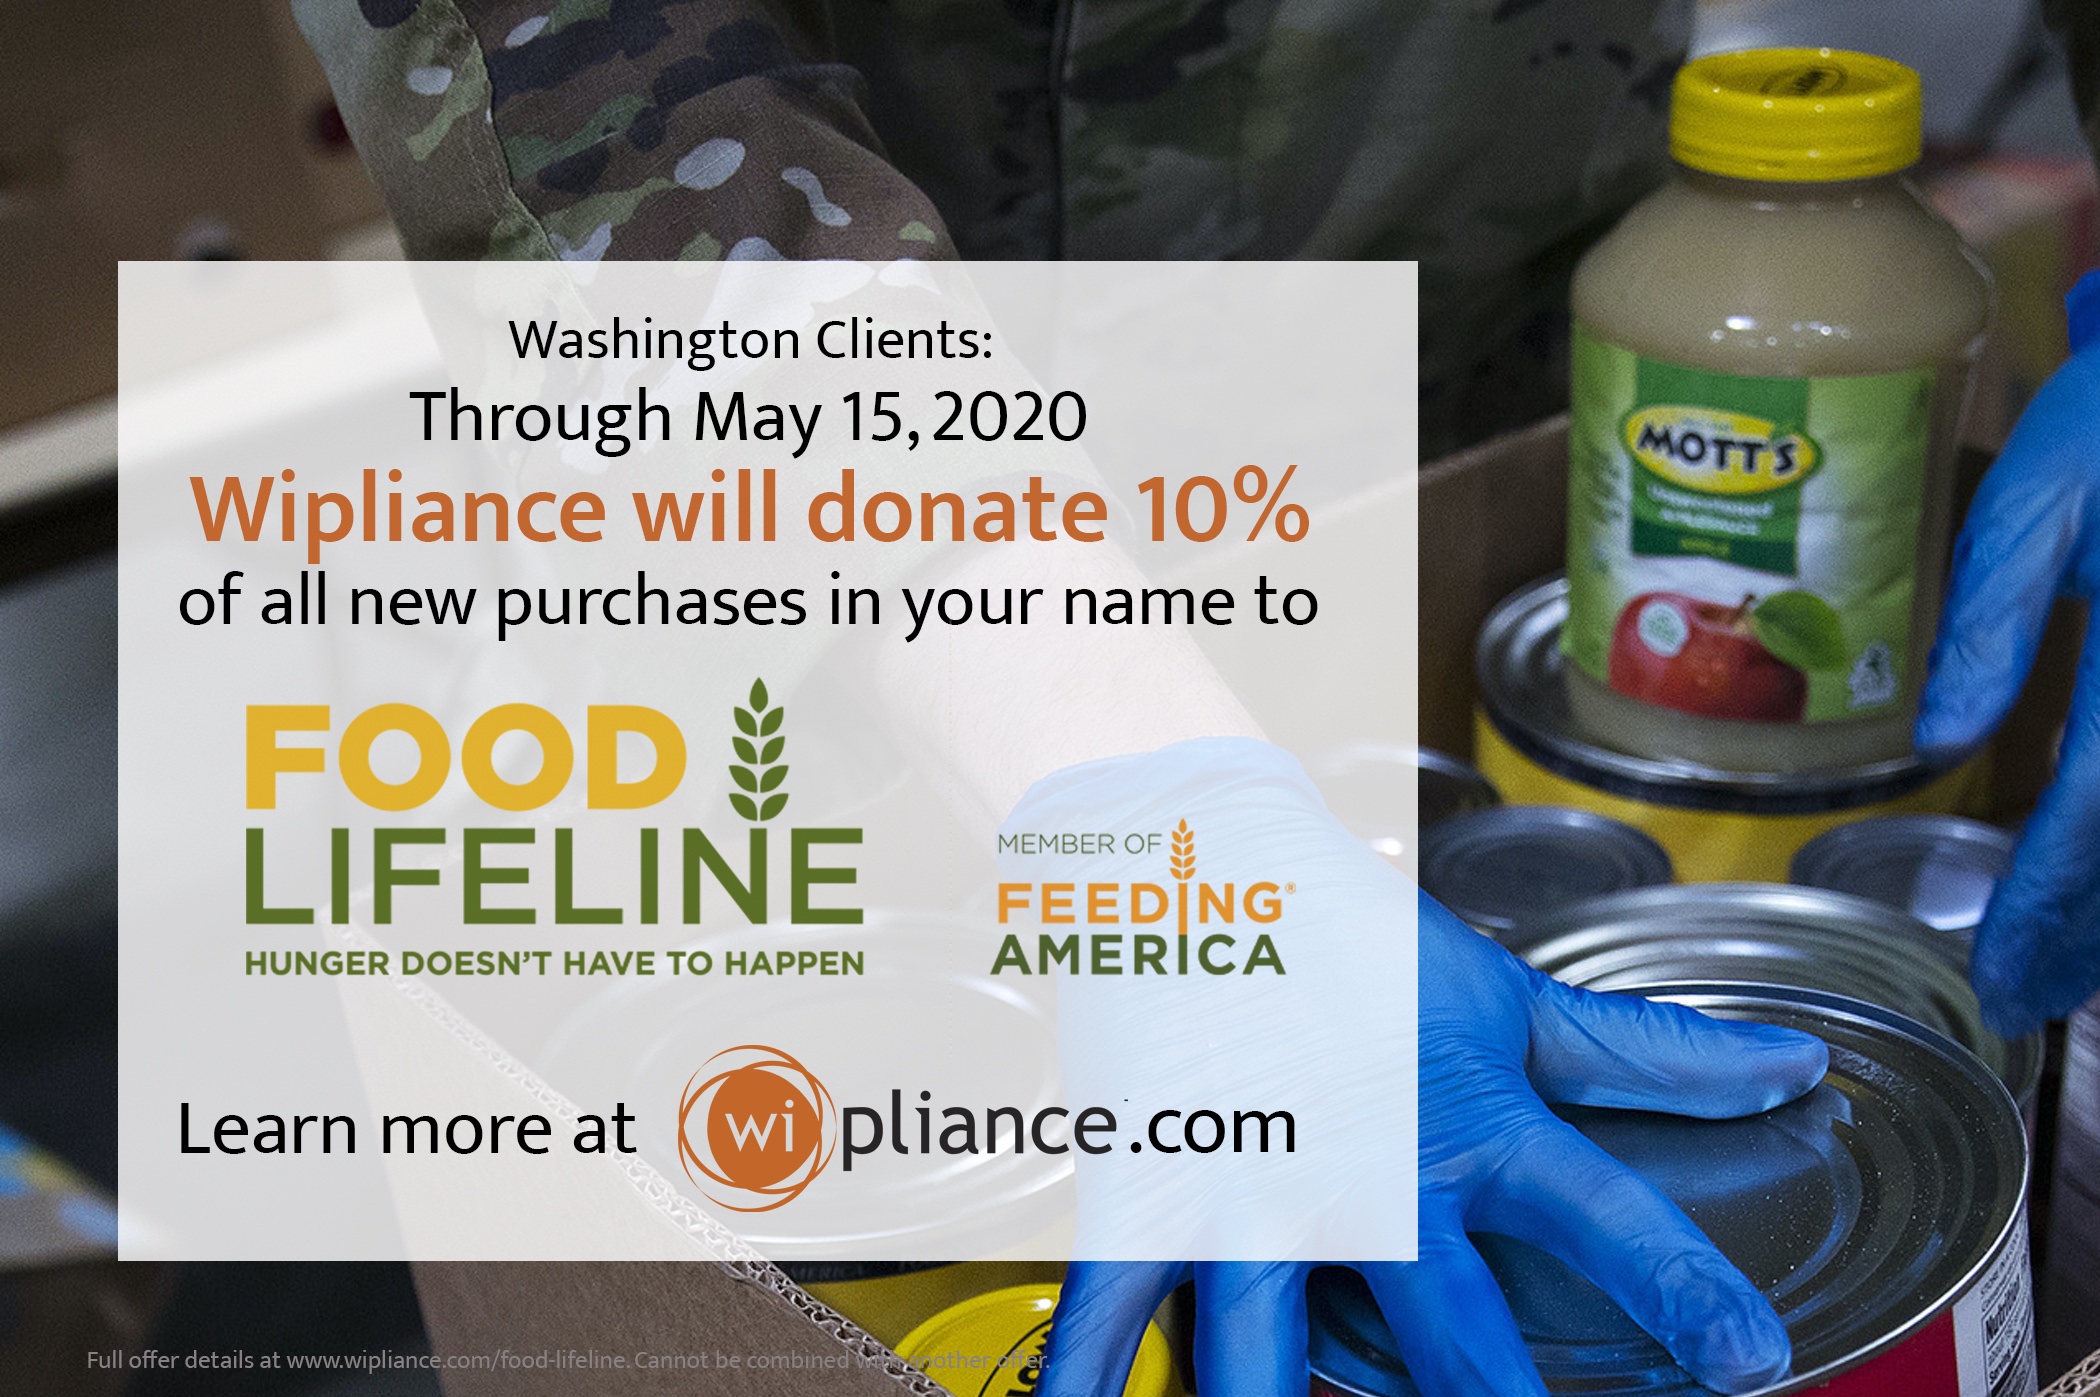 Now Through May 15- Wipliance to donate 10% of New Projects to Food Lifeline